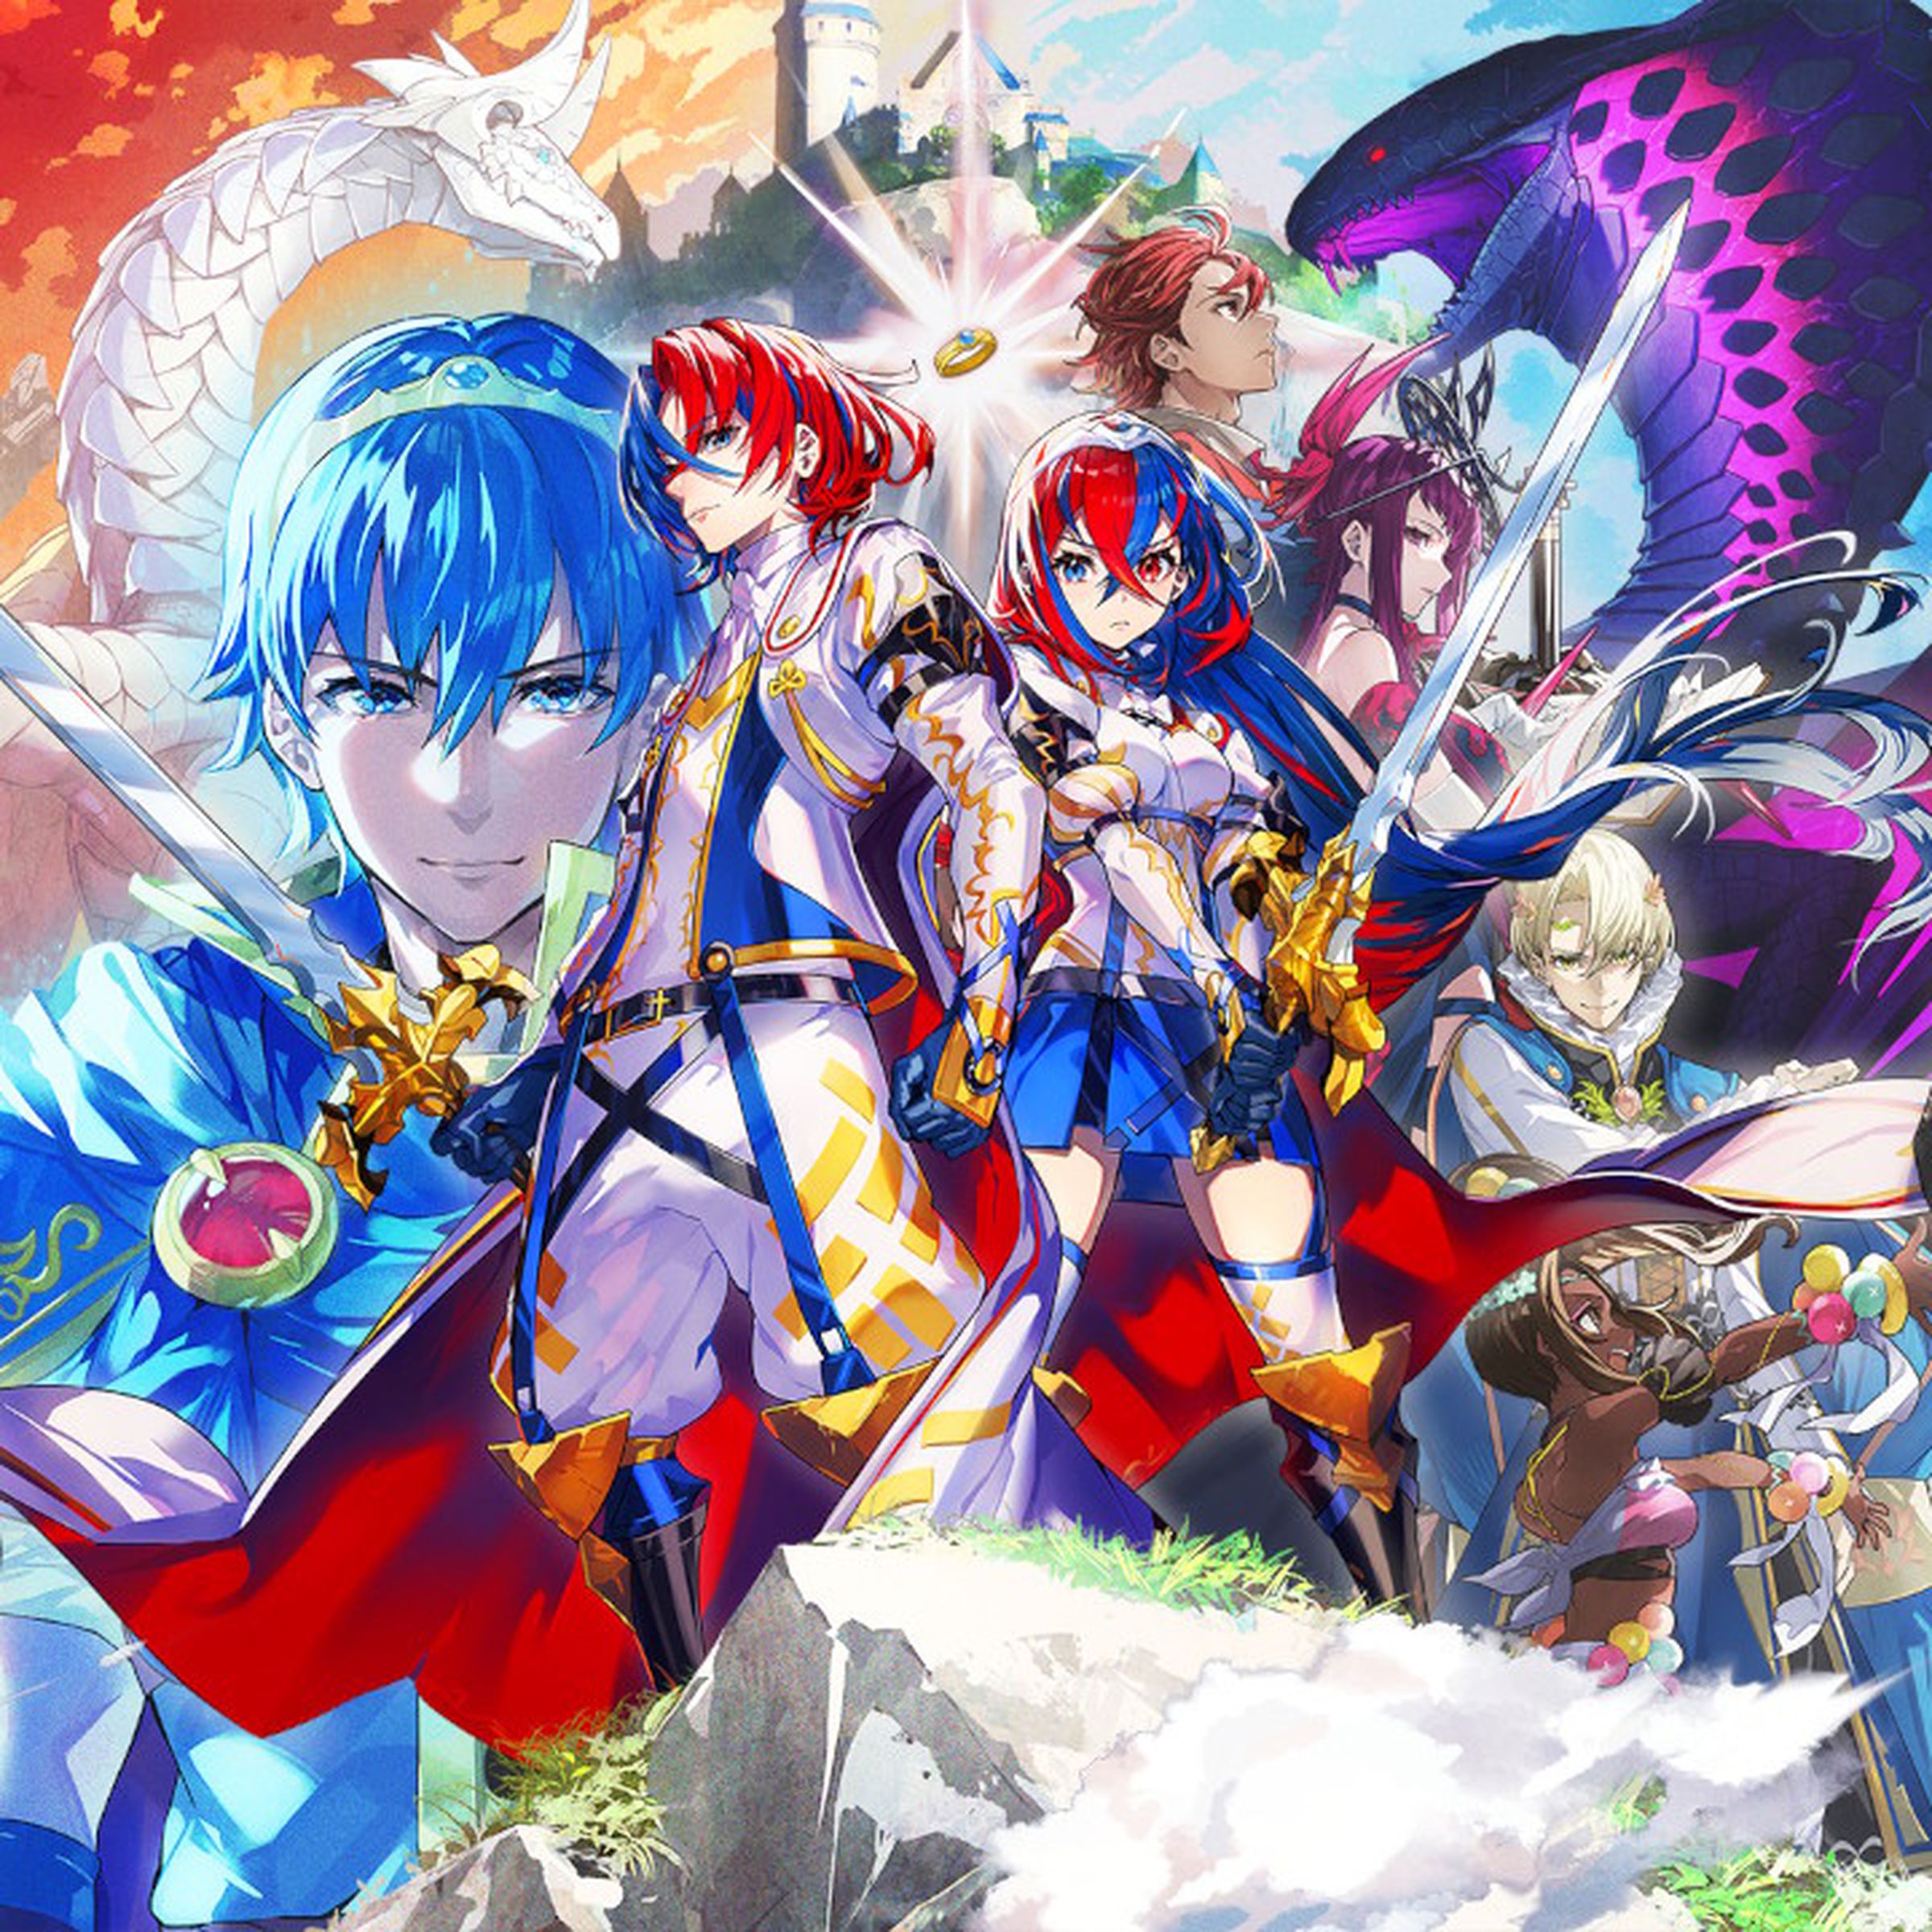 Key art from Fire Emblem Engage featuring a collage of the game’s characters as two white and black dragons fight in the background